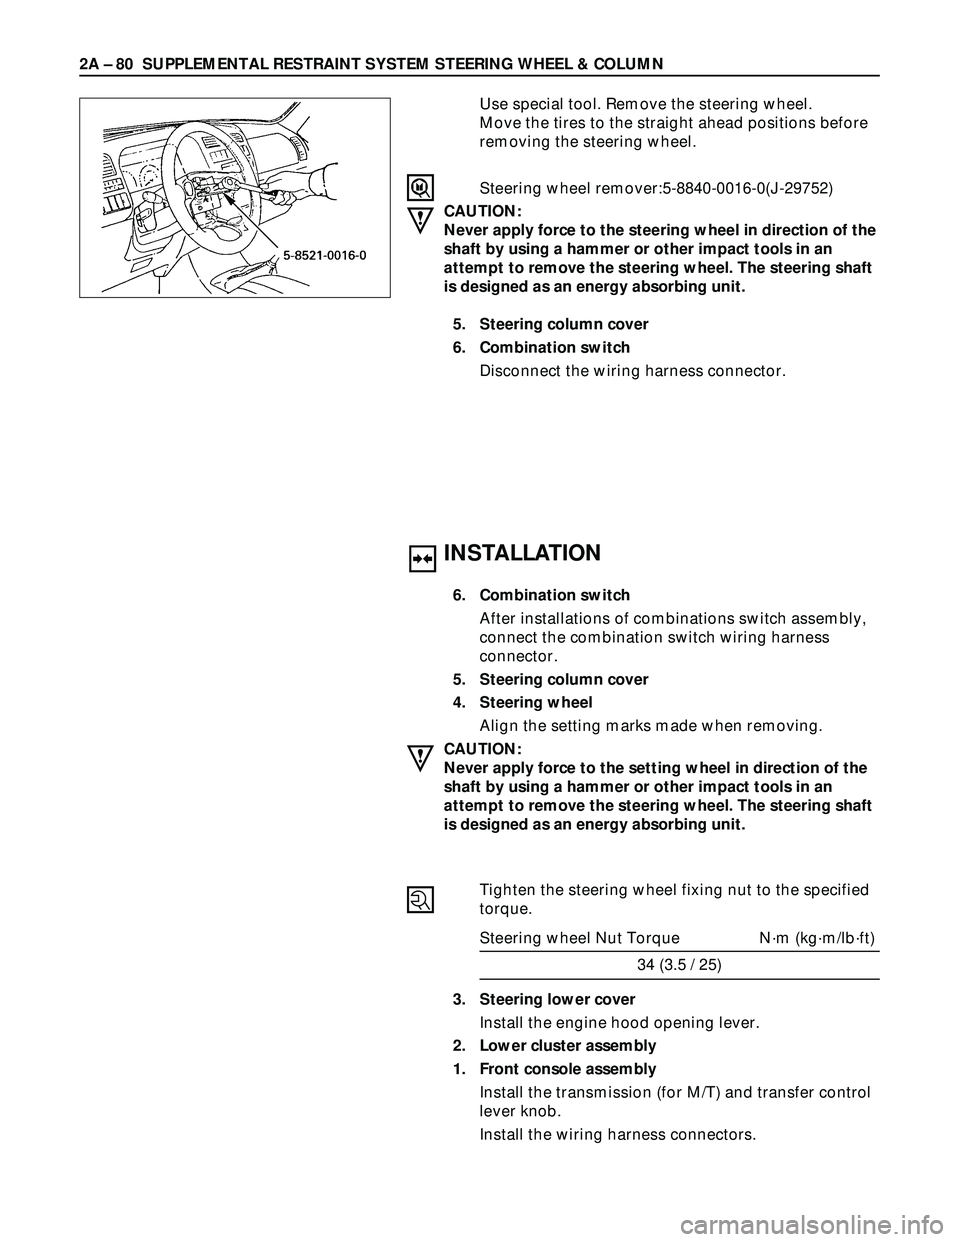 ISUZU TROOPER 1998  Service User Guide 2A – 80 SUPPLEMENTAL RESTRAINT SYSTEM STEERING WHEEL & COLUMN
INSTALLATION
6. Combination switch
After installations of combinations switch assembly,
connect the combination switch wiring harness
co